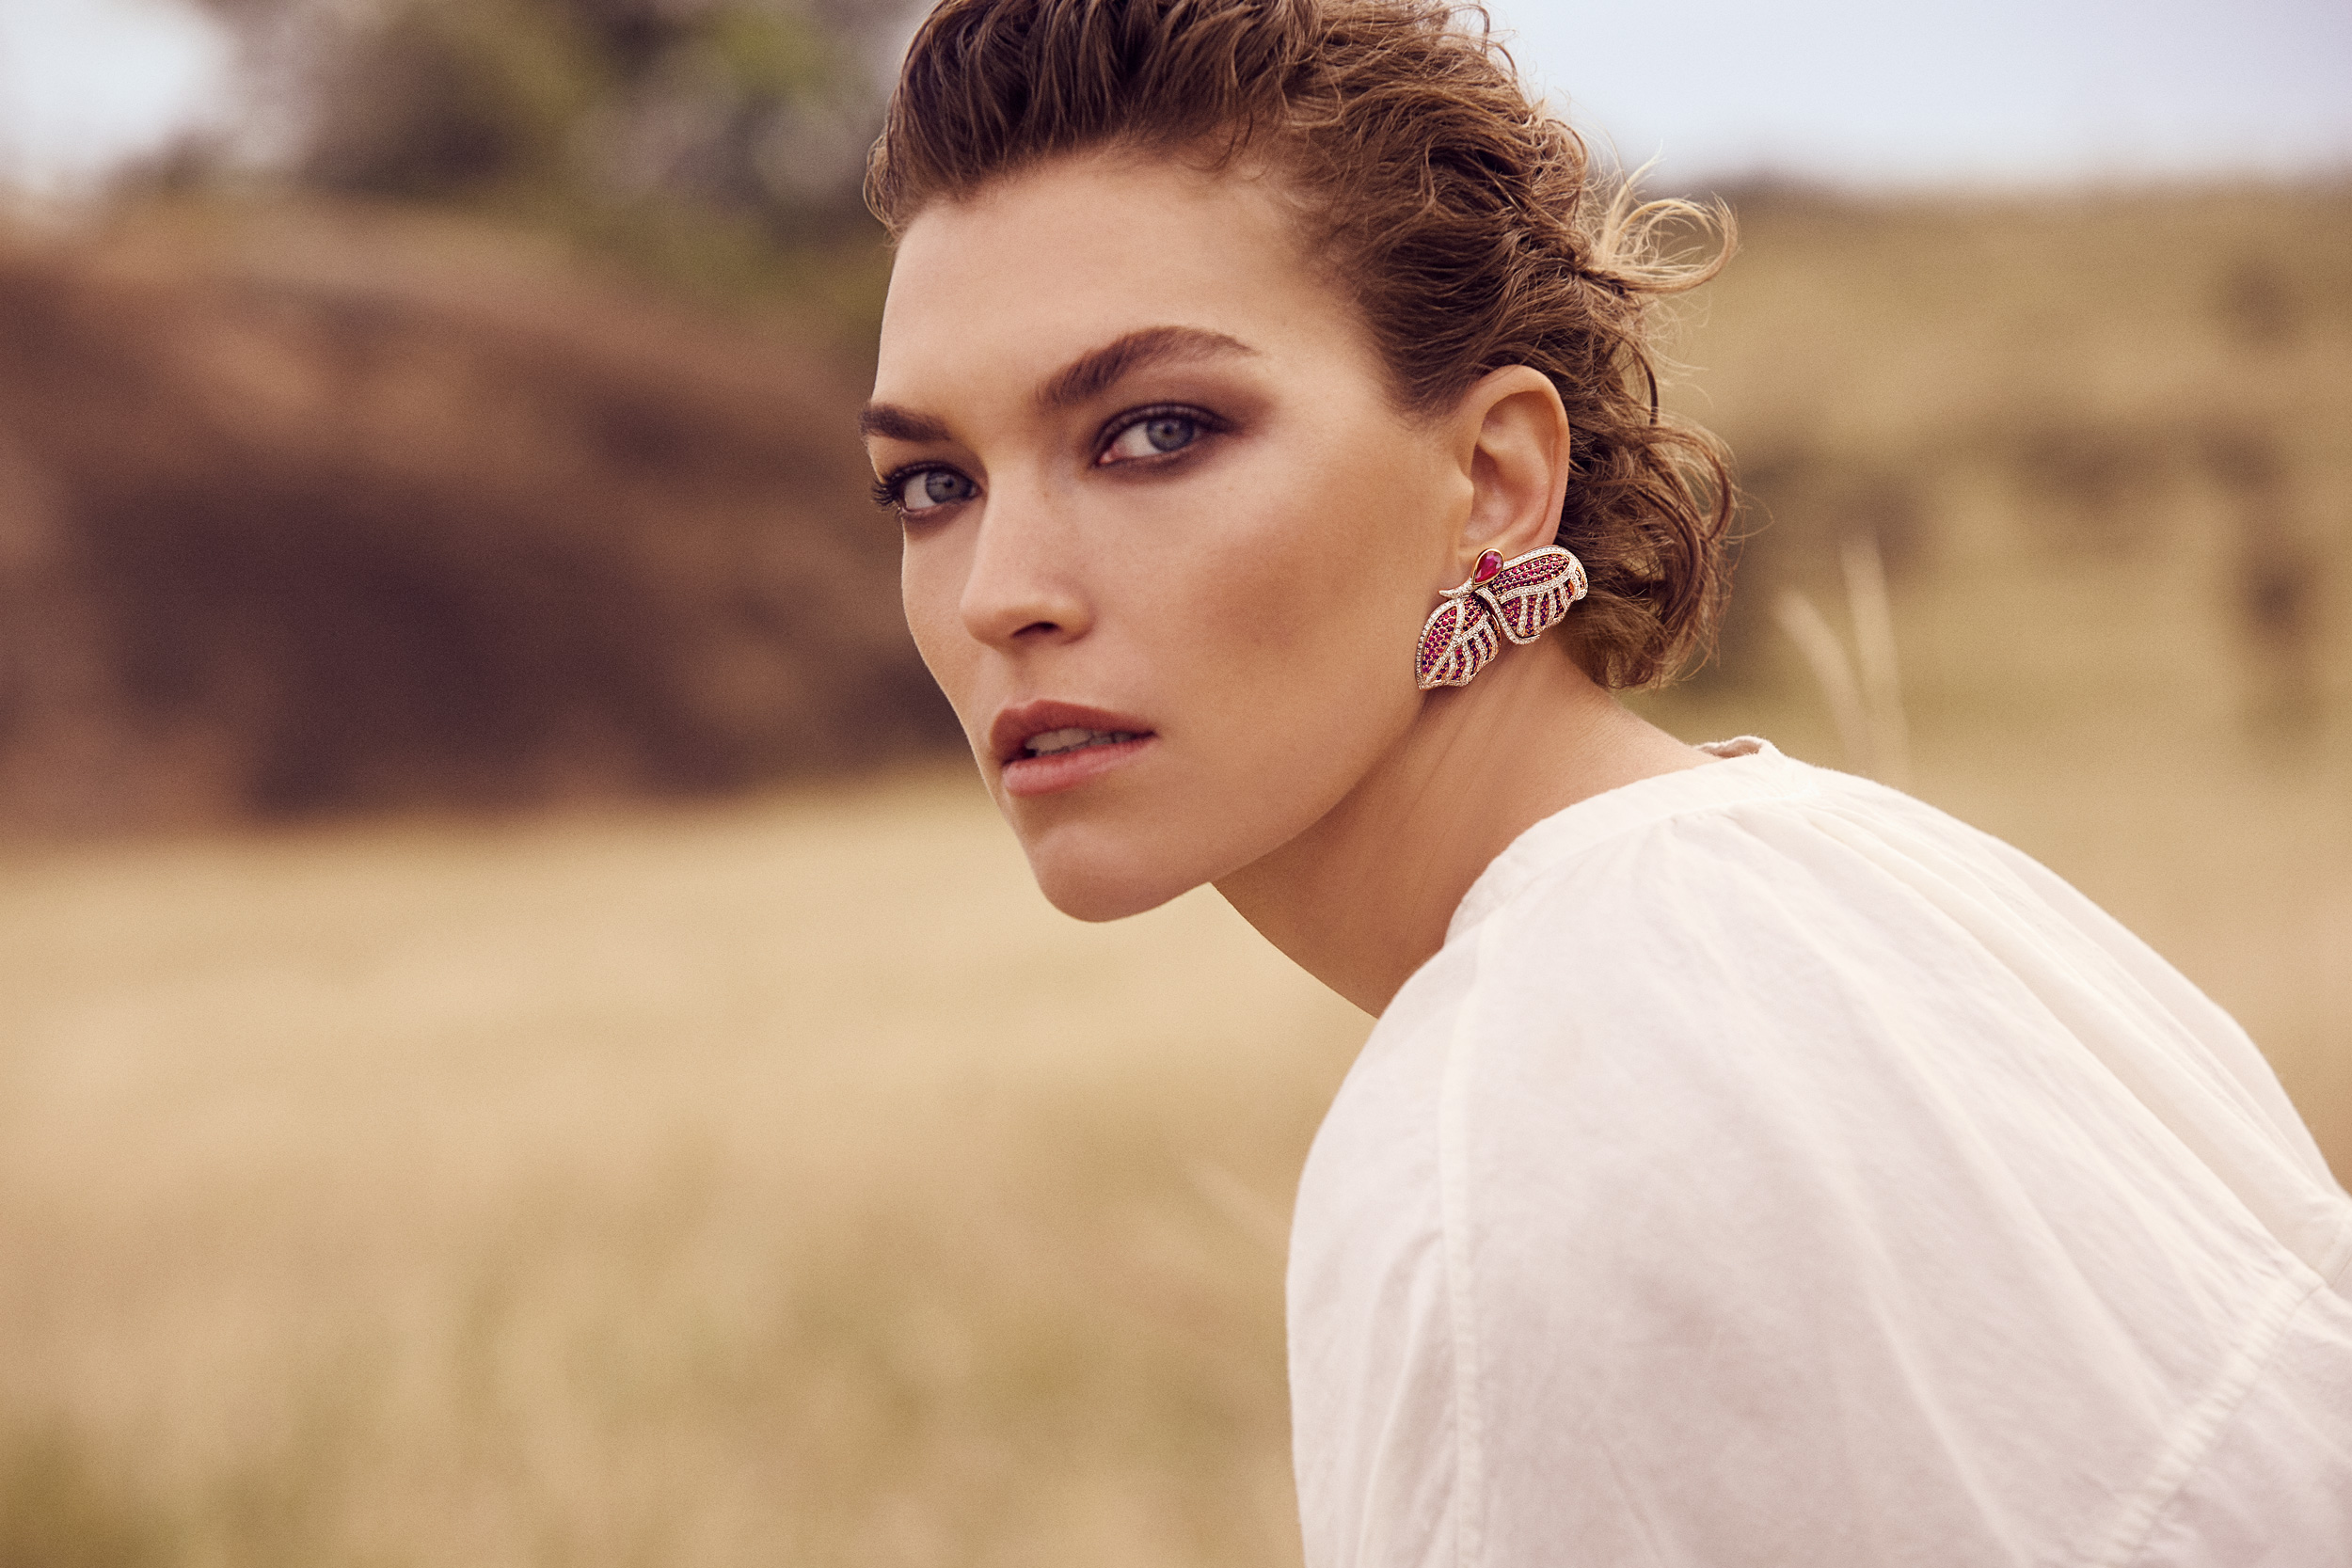 Image Credits: ‘Walk For Giants’, photography by Francesco Carrozzini, creative direction by Riccardo Ruini, shot on location at Enasoit Game Sanctuary, featuring Fehmida Lakhany X Gemfields Butterfly Earrings